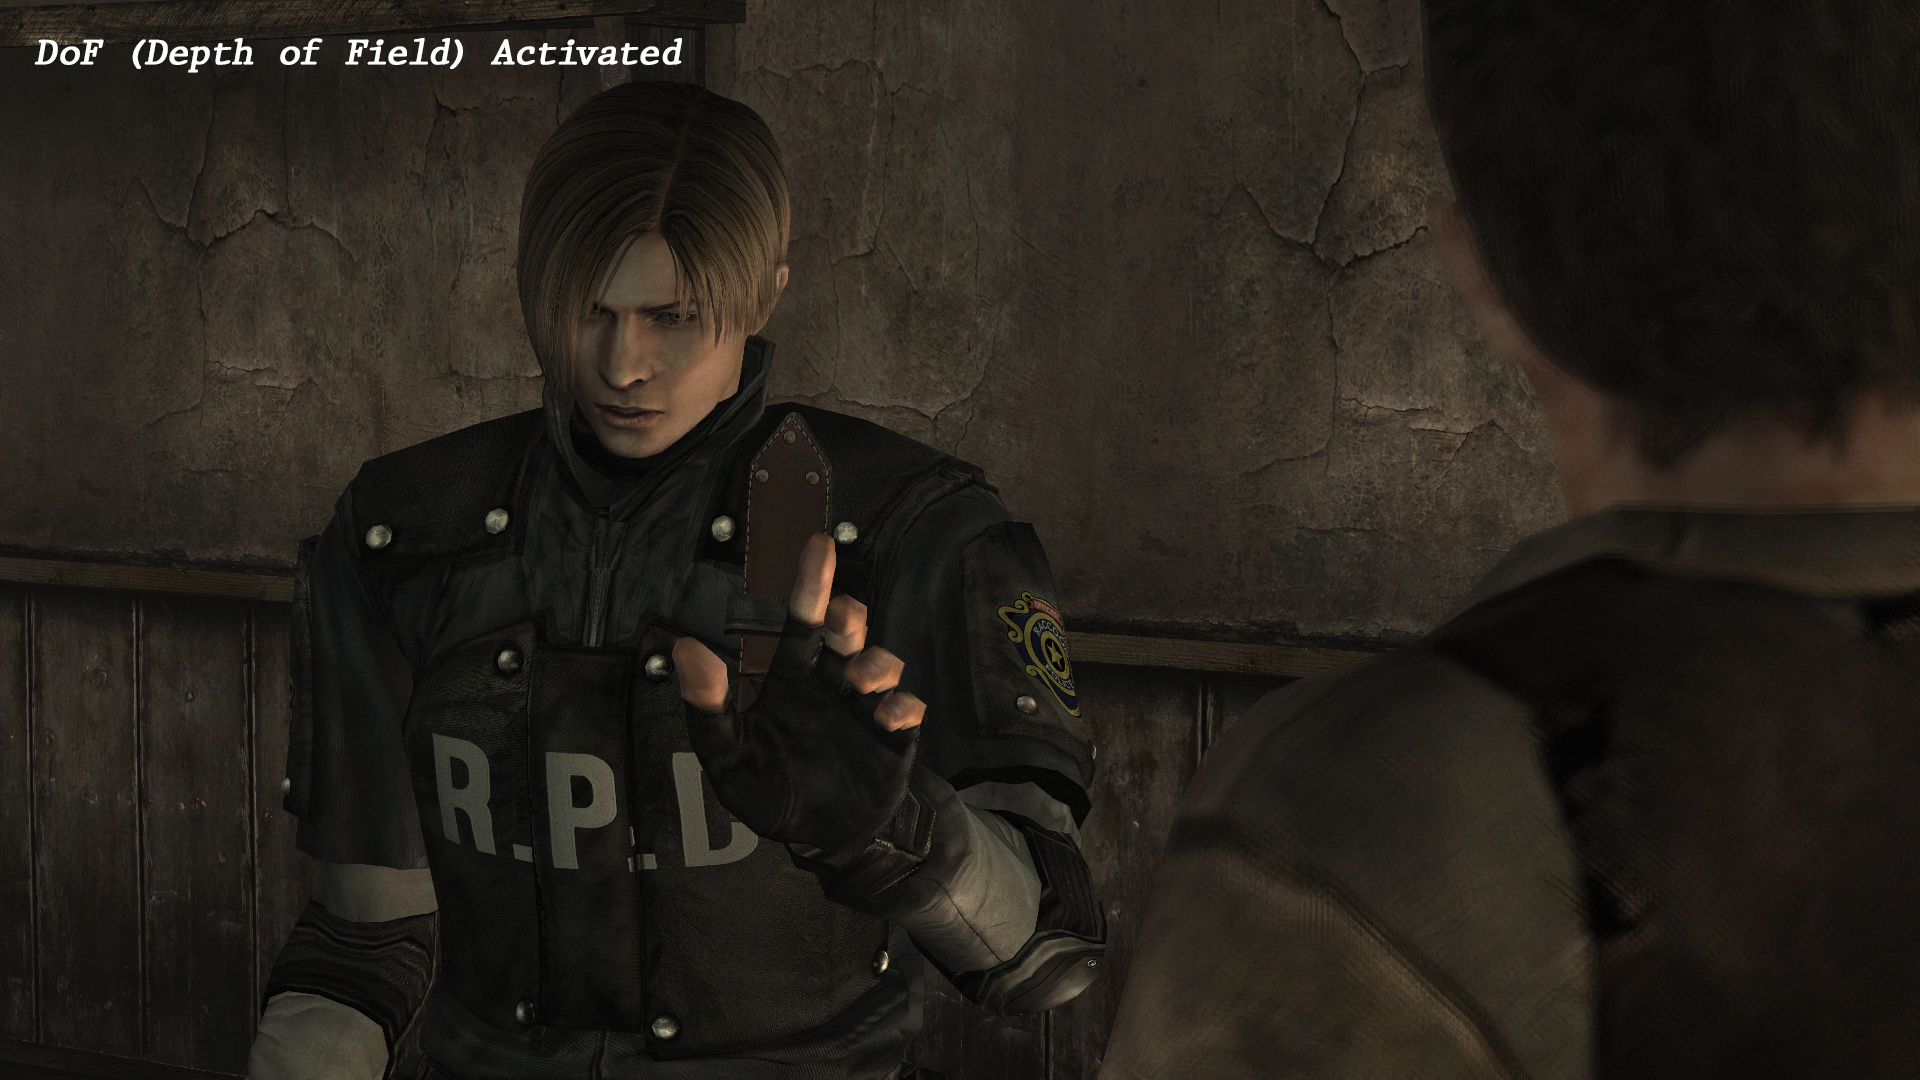 resident evil 4 ultimate hd edition graphics comparison